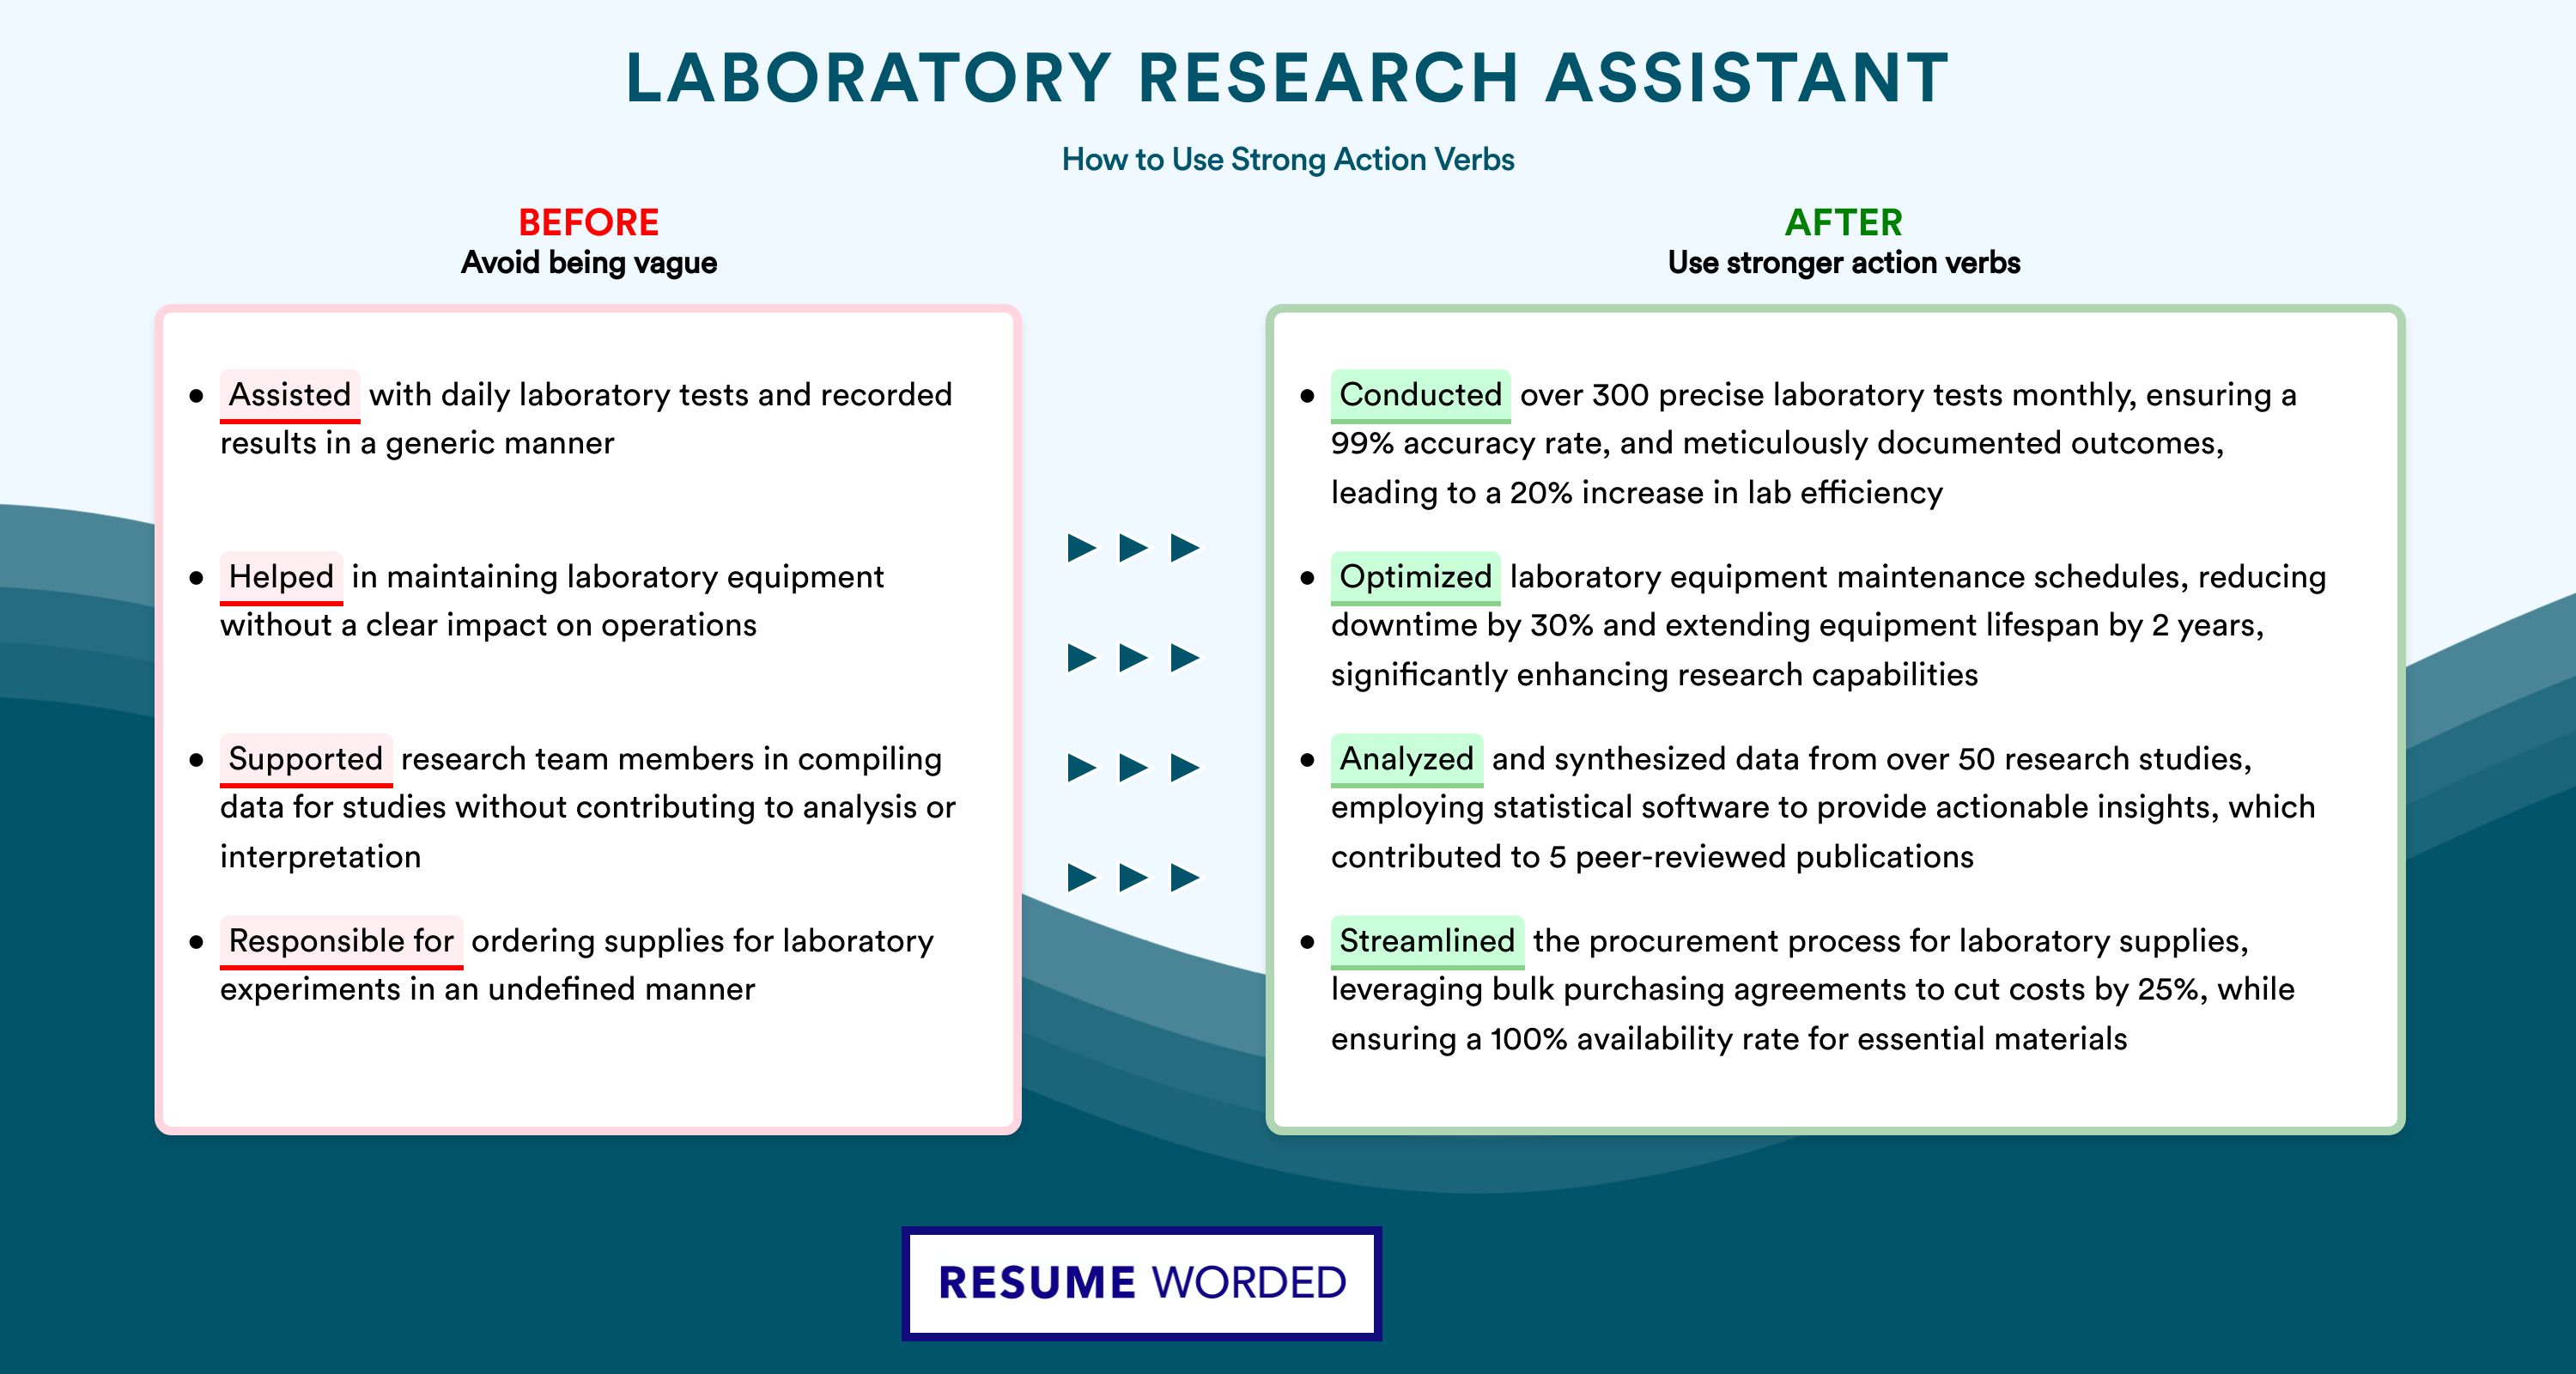 Action Verbs for Laboratory Research Assistant